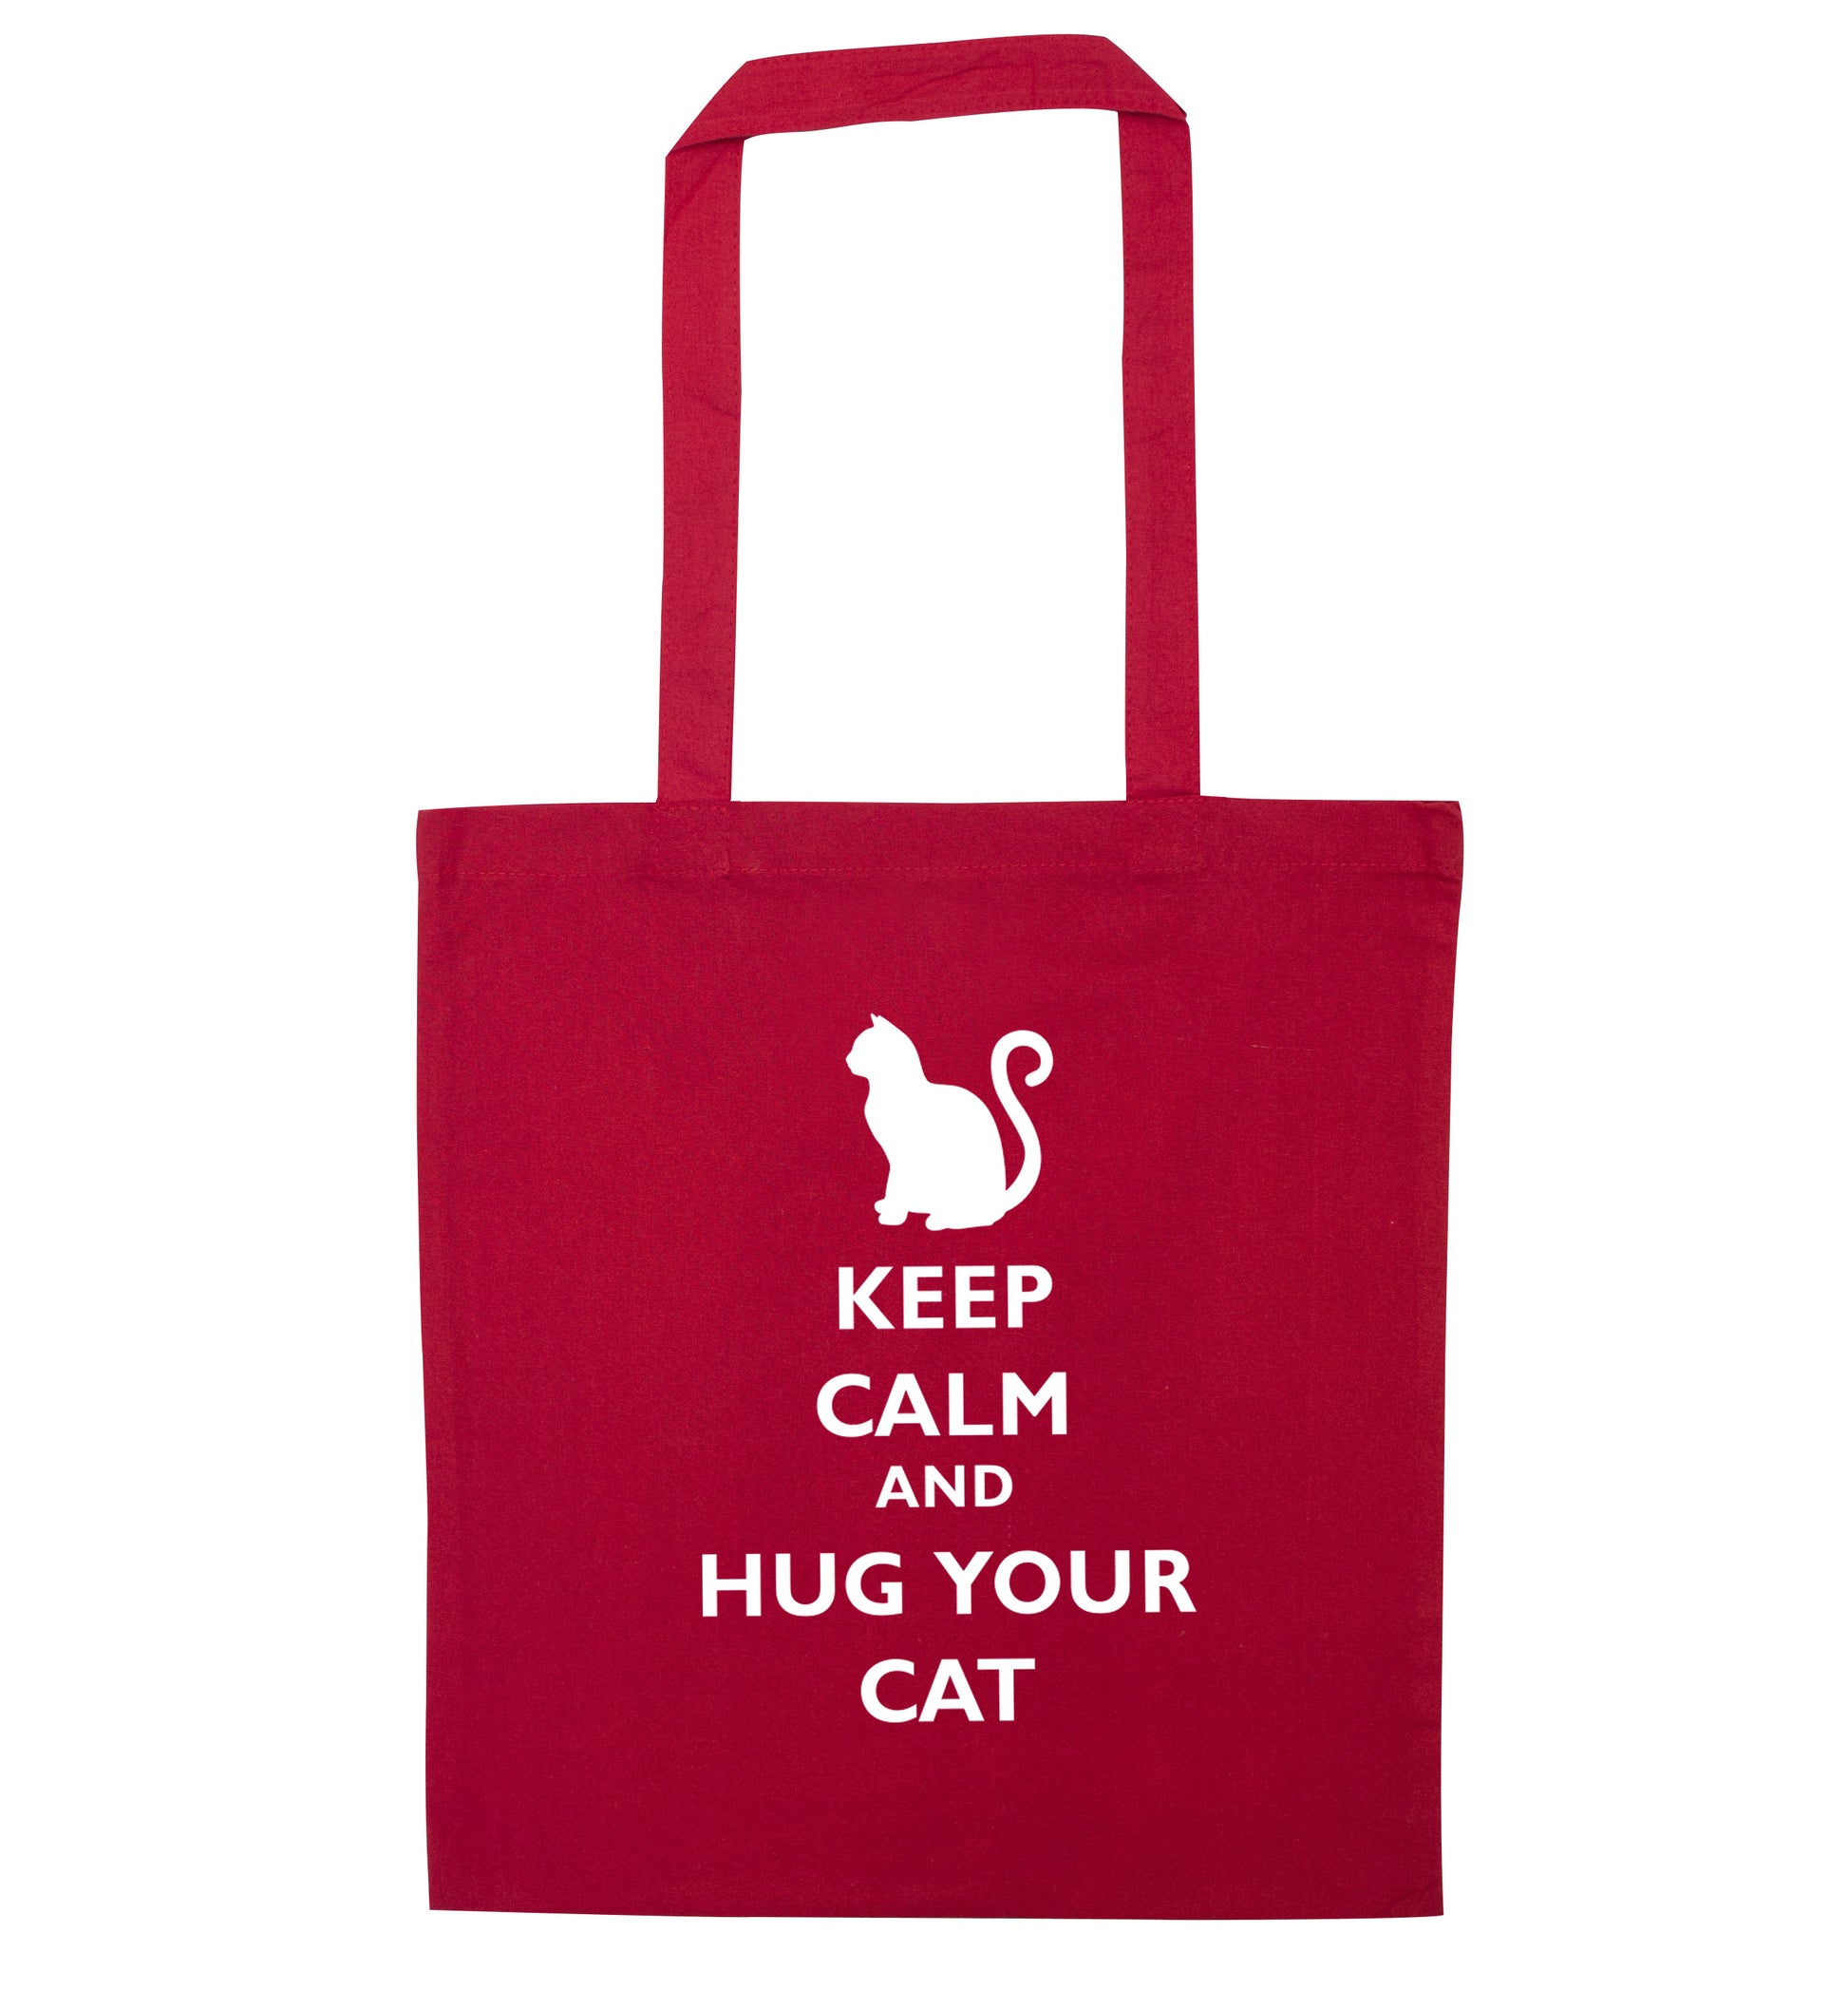 Keep calm and hug your cat red tote bag